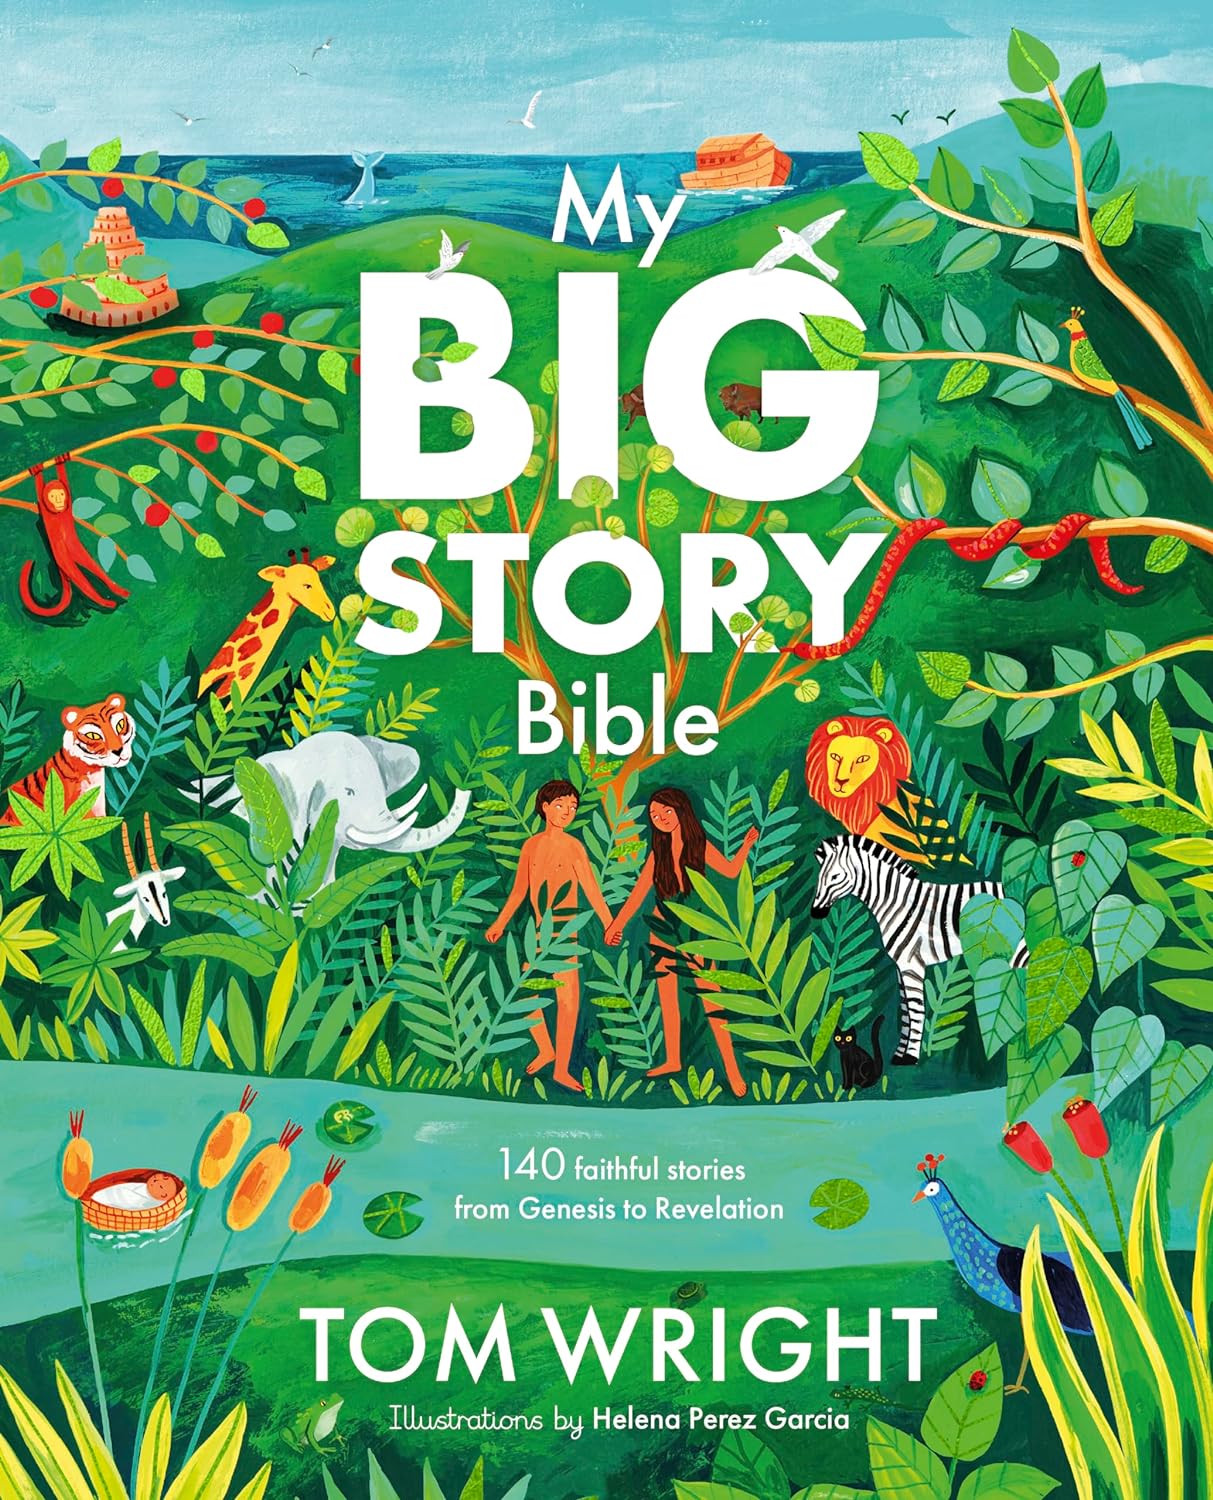 My Big Story Bible - 140 Faithful Stories, from Genesis to Revelation